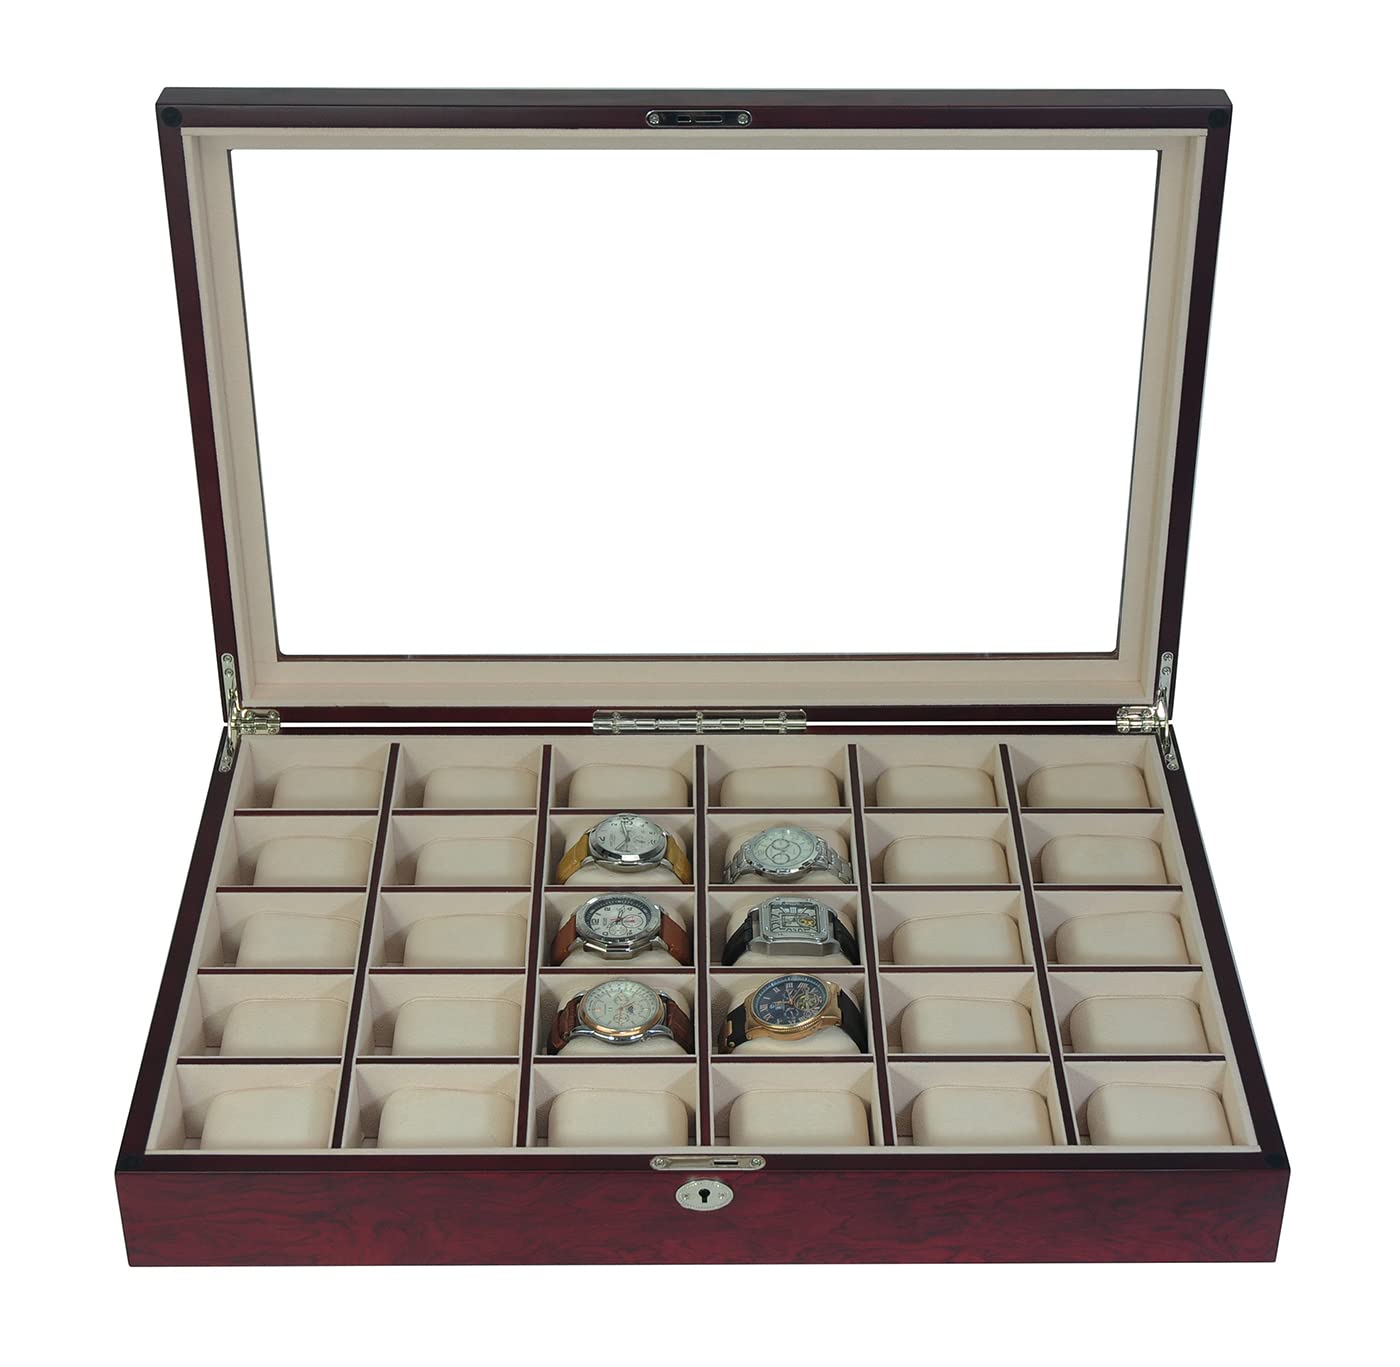 TimelyBuys 30 Piece Cherry Wood Watch Display Wall Hanging Case and Storage Organizer Box and Stand Father's Day